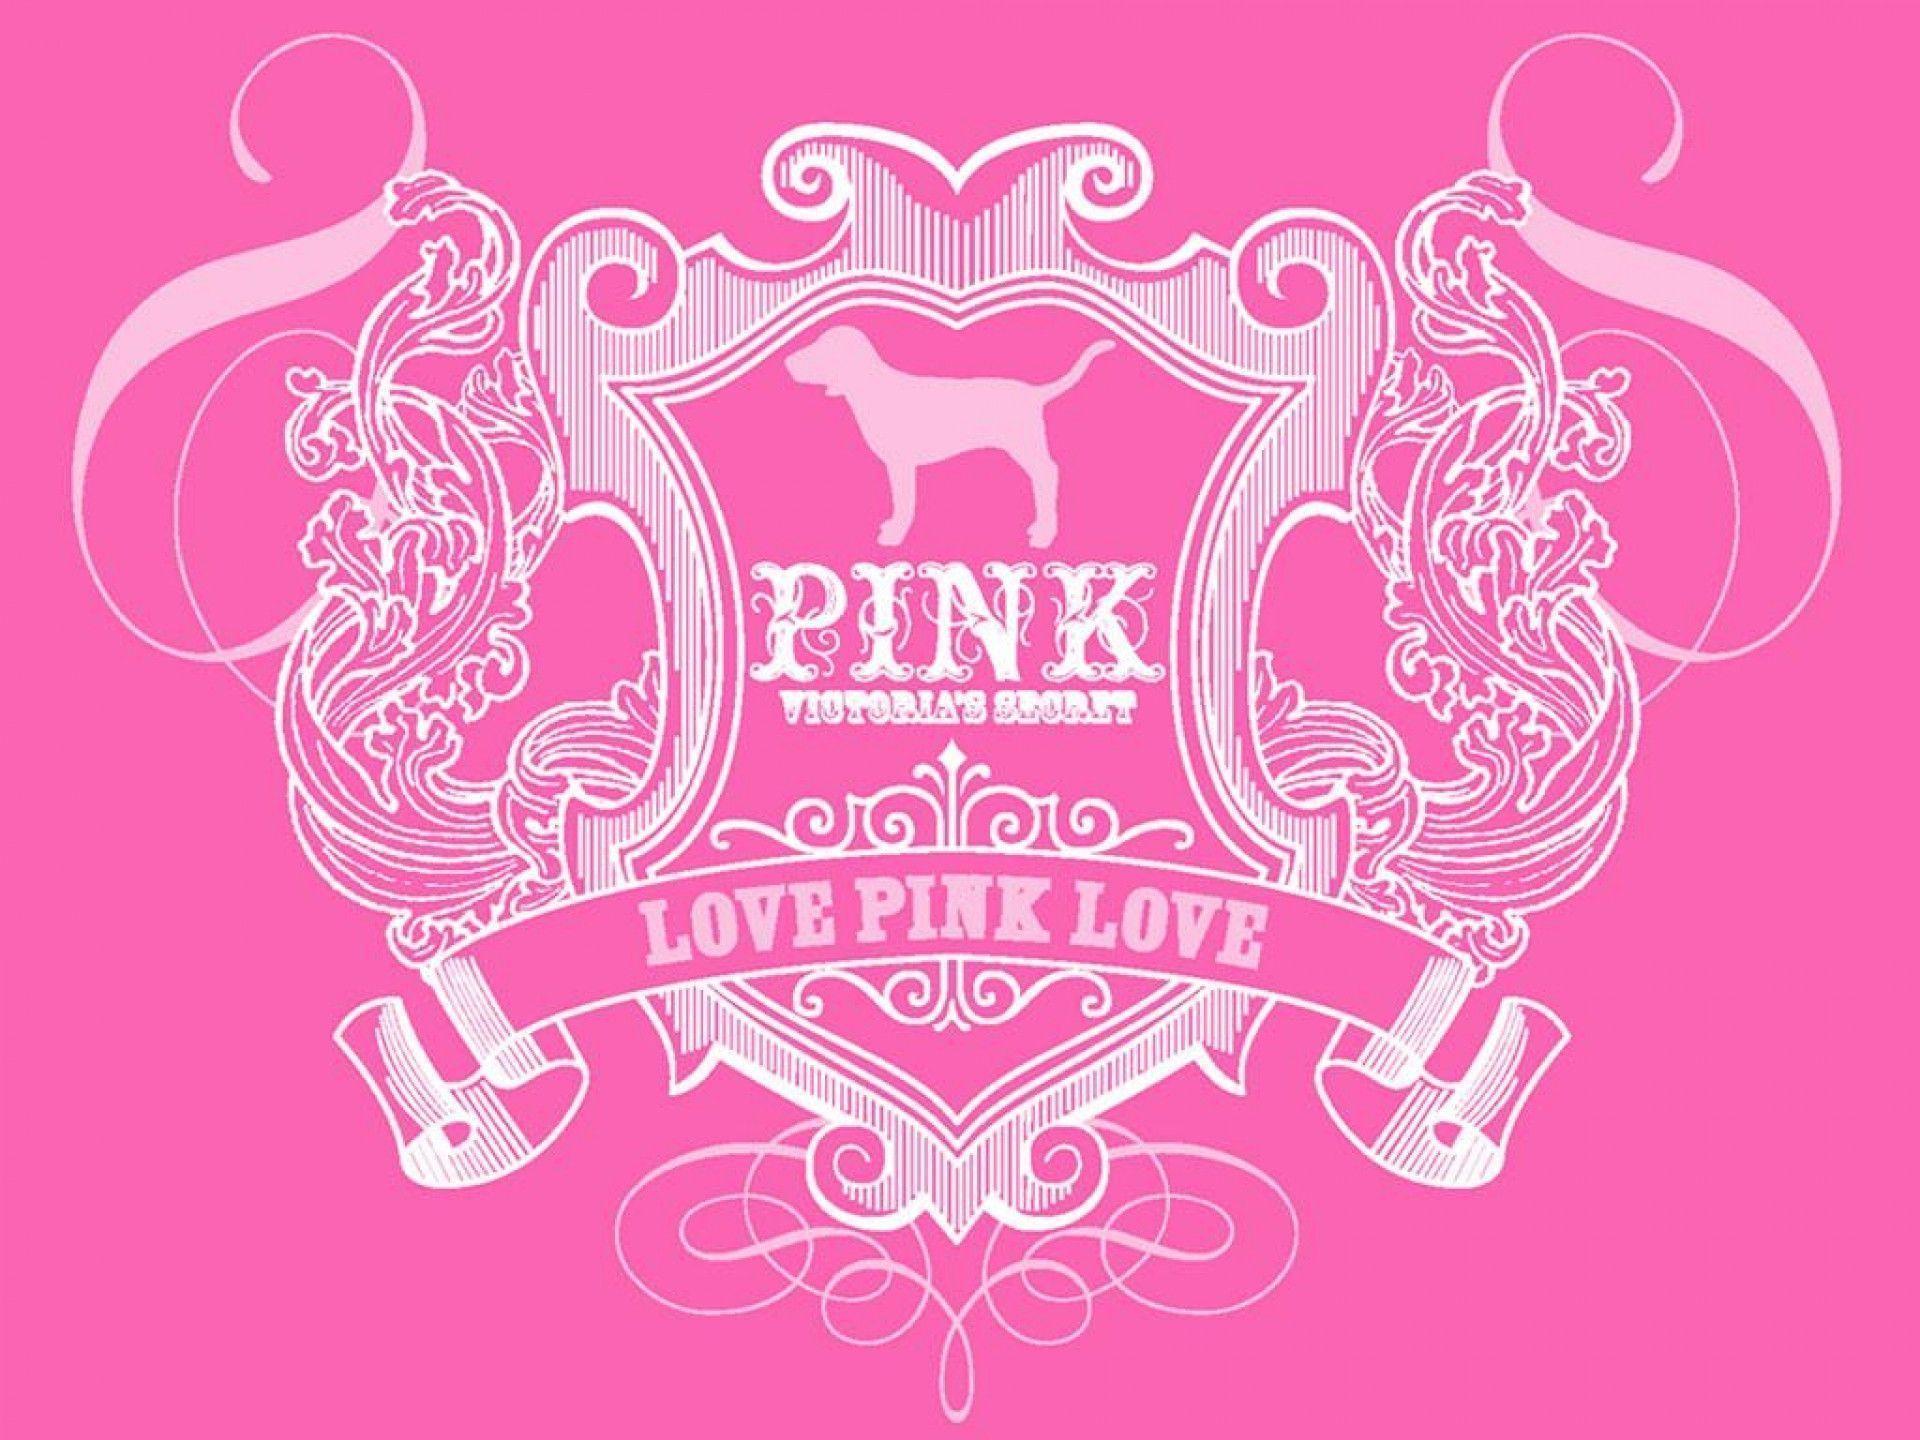 Love pink love wallpaper download the free love pink love wallpaper